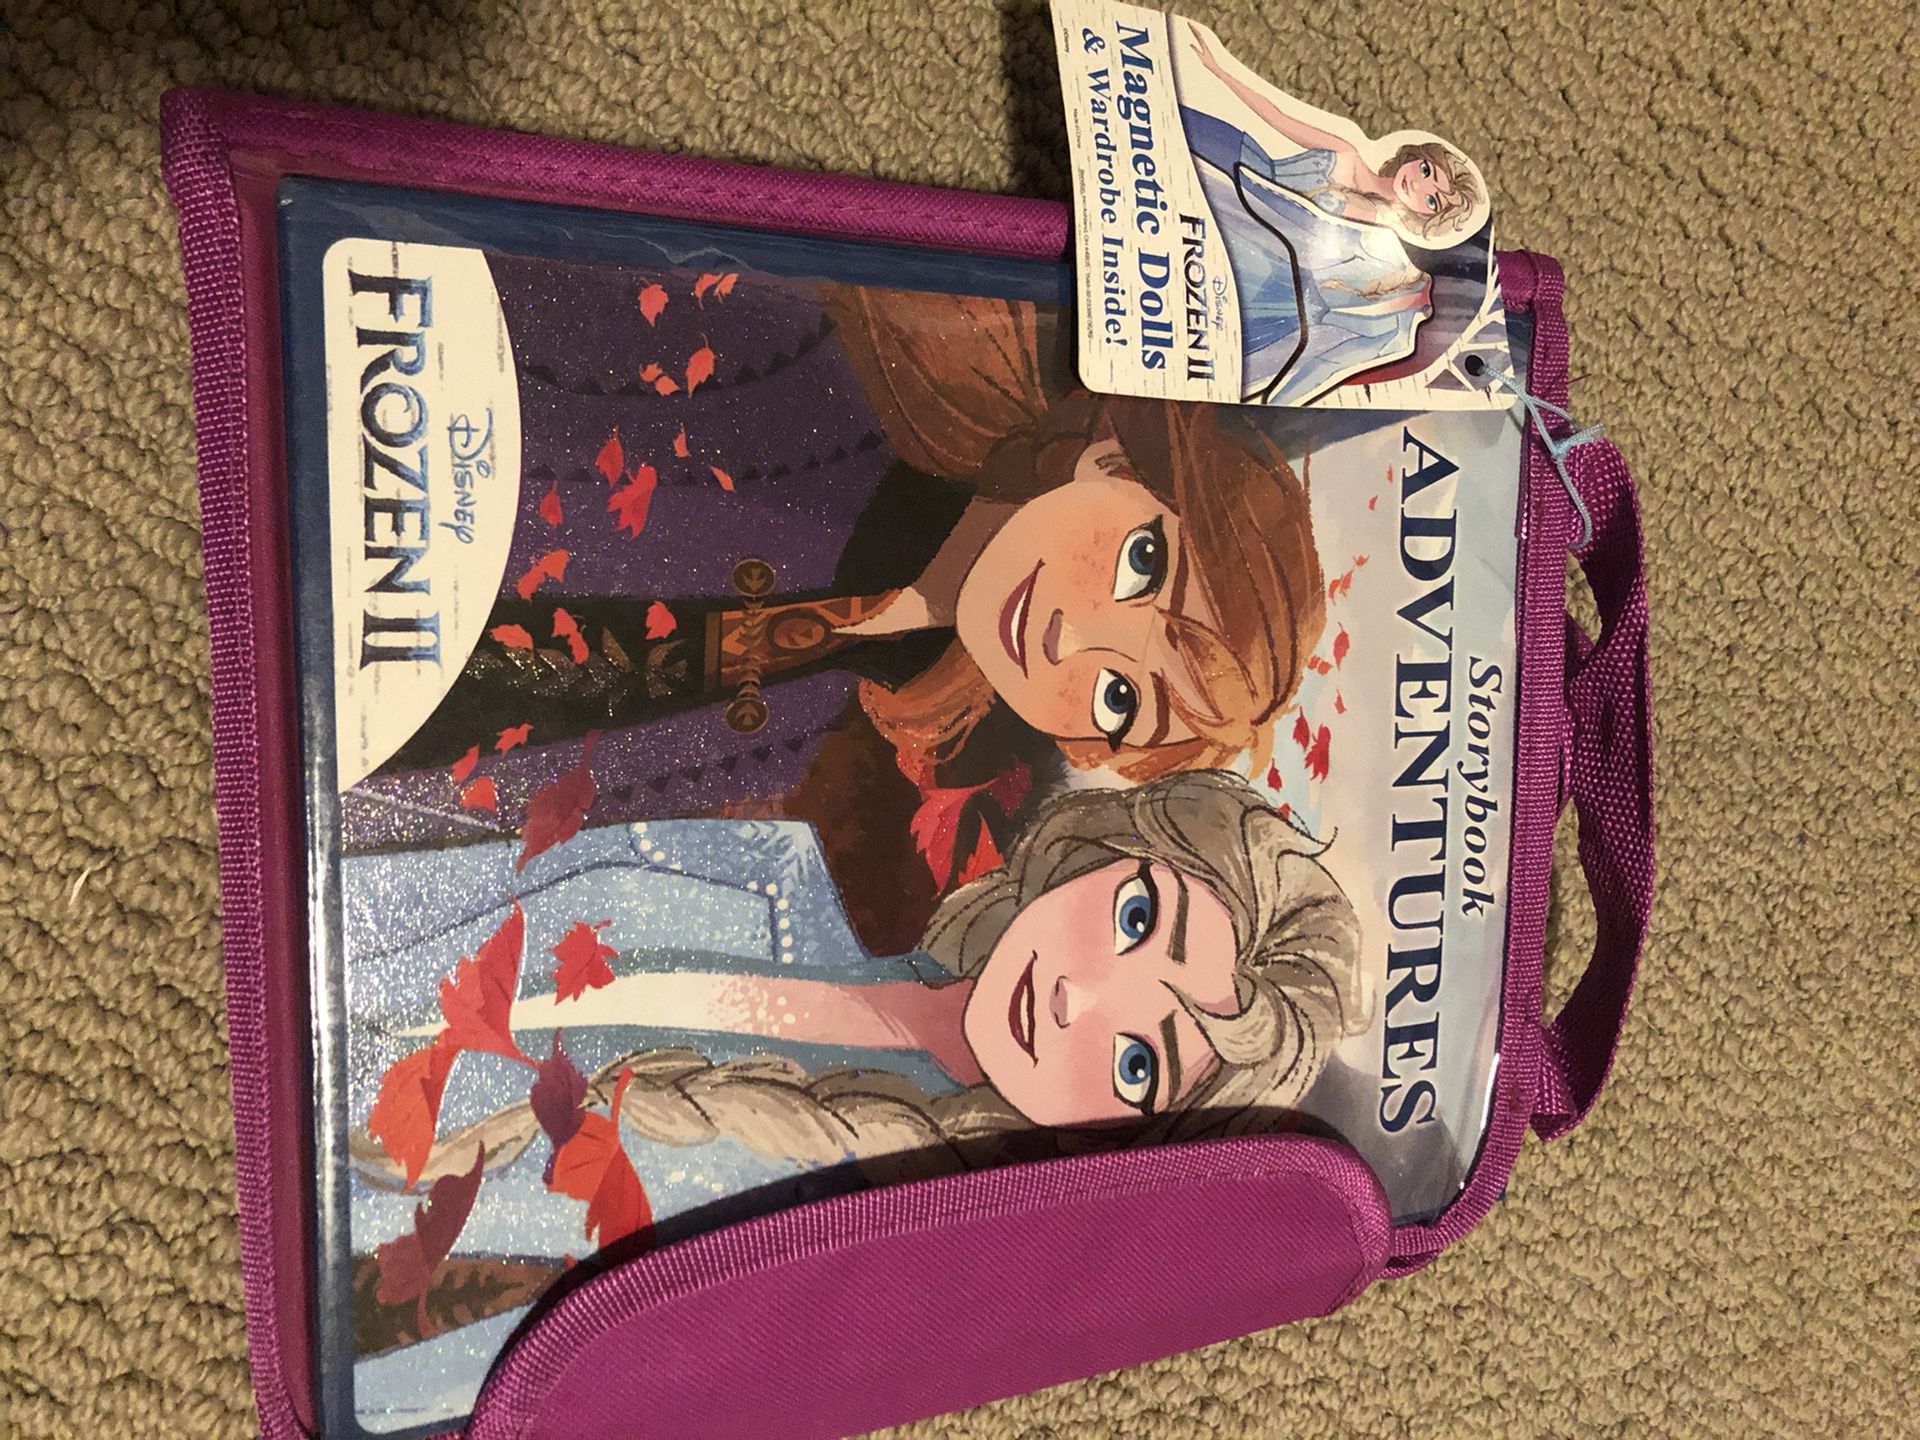 Frozen 2 story book with magnetic dolls